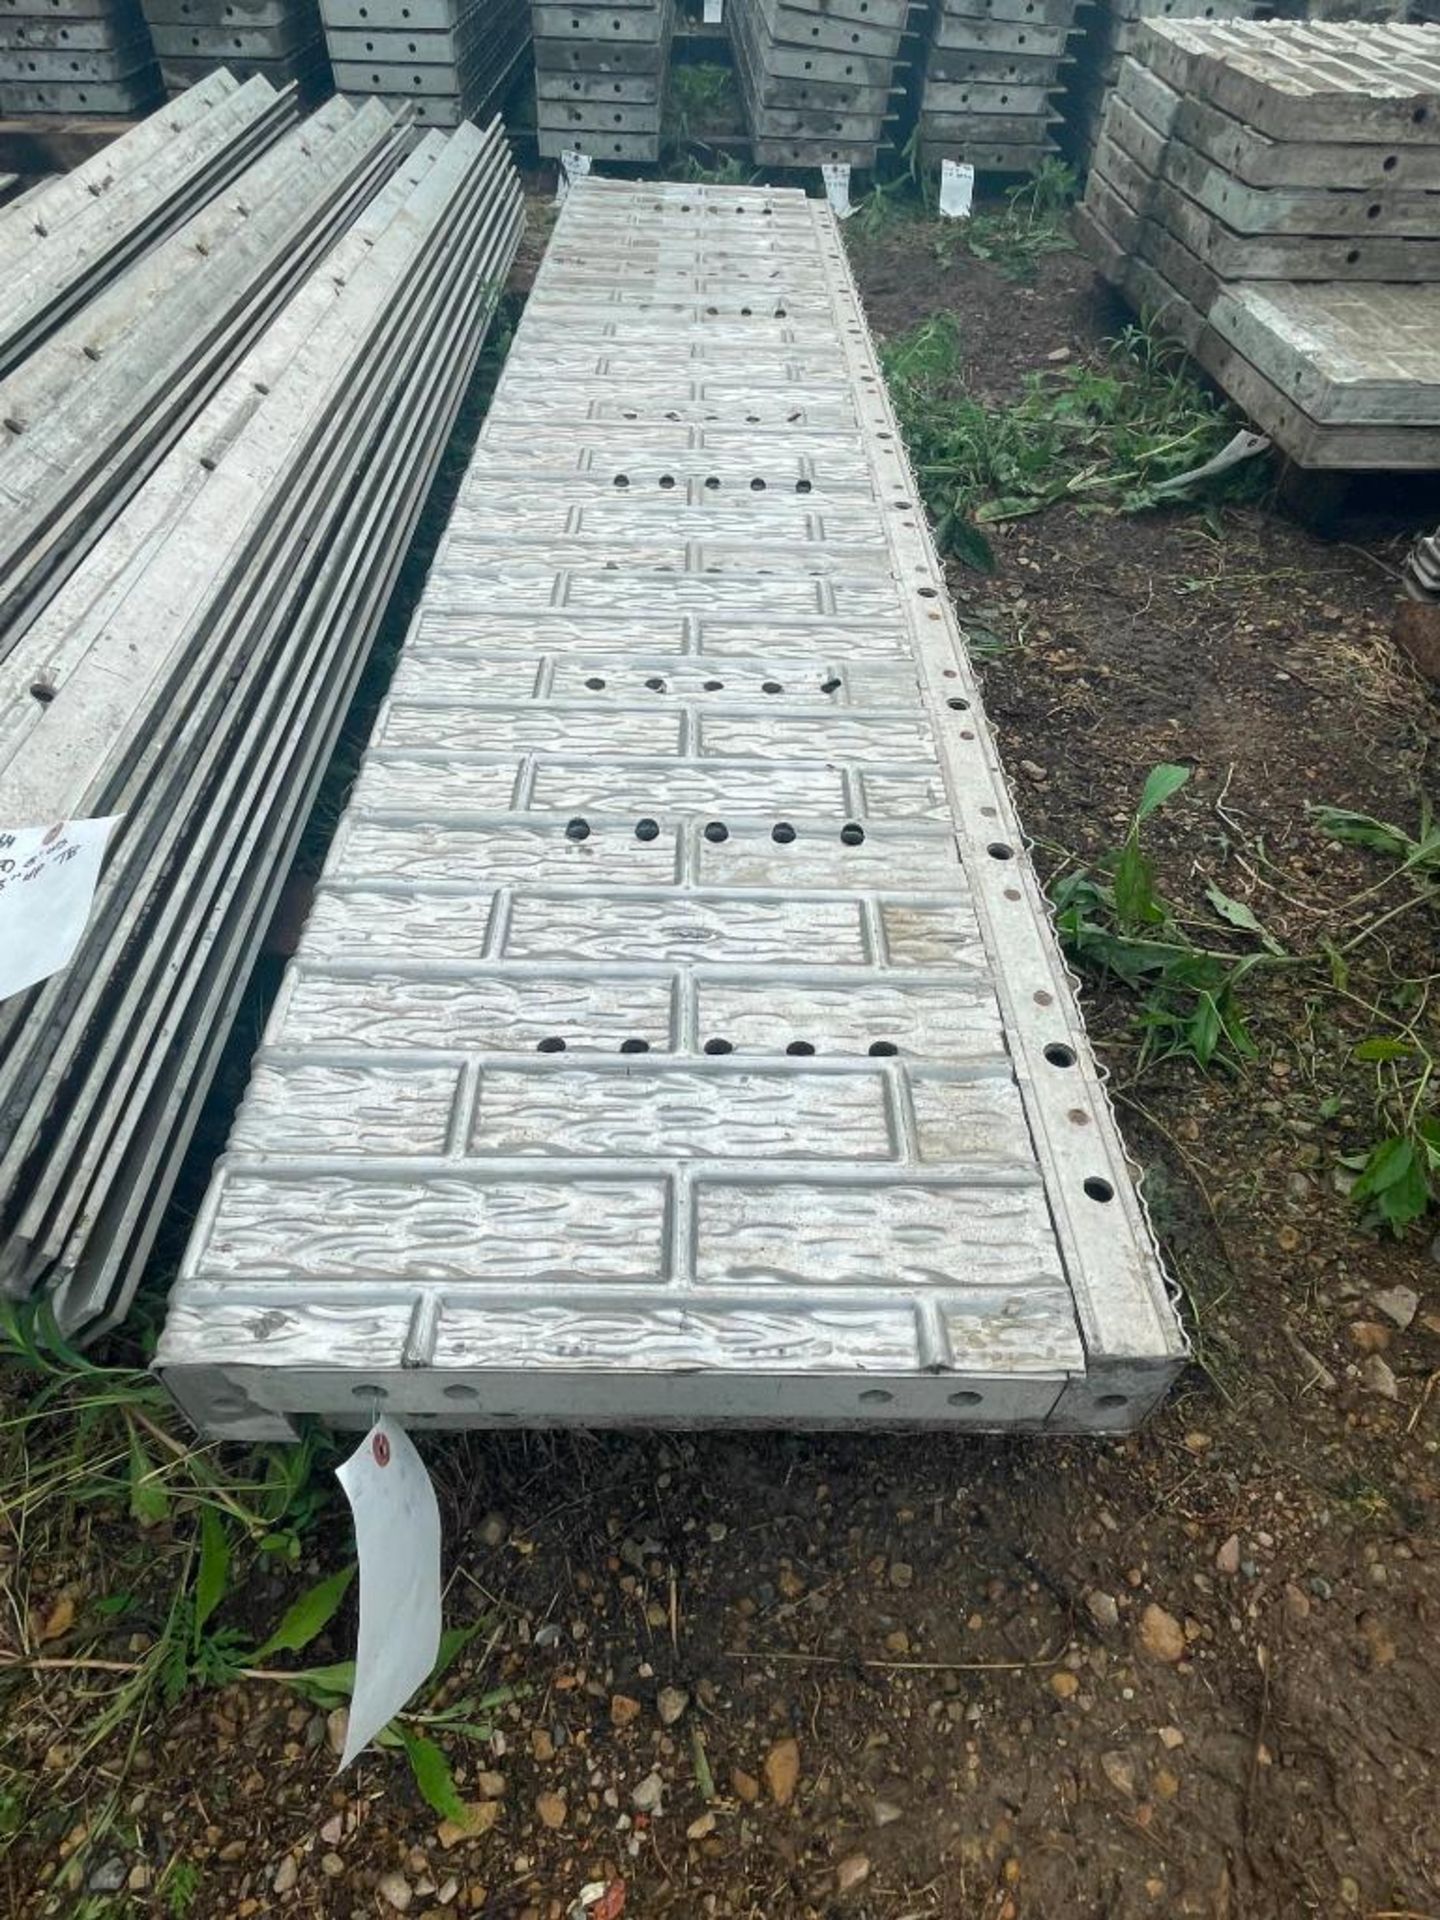 (2) 18" x 8' with 2" Ledge Wall-Ties Textured Brick Aluminum Concrete Forms 8" Hole Pattern. Located